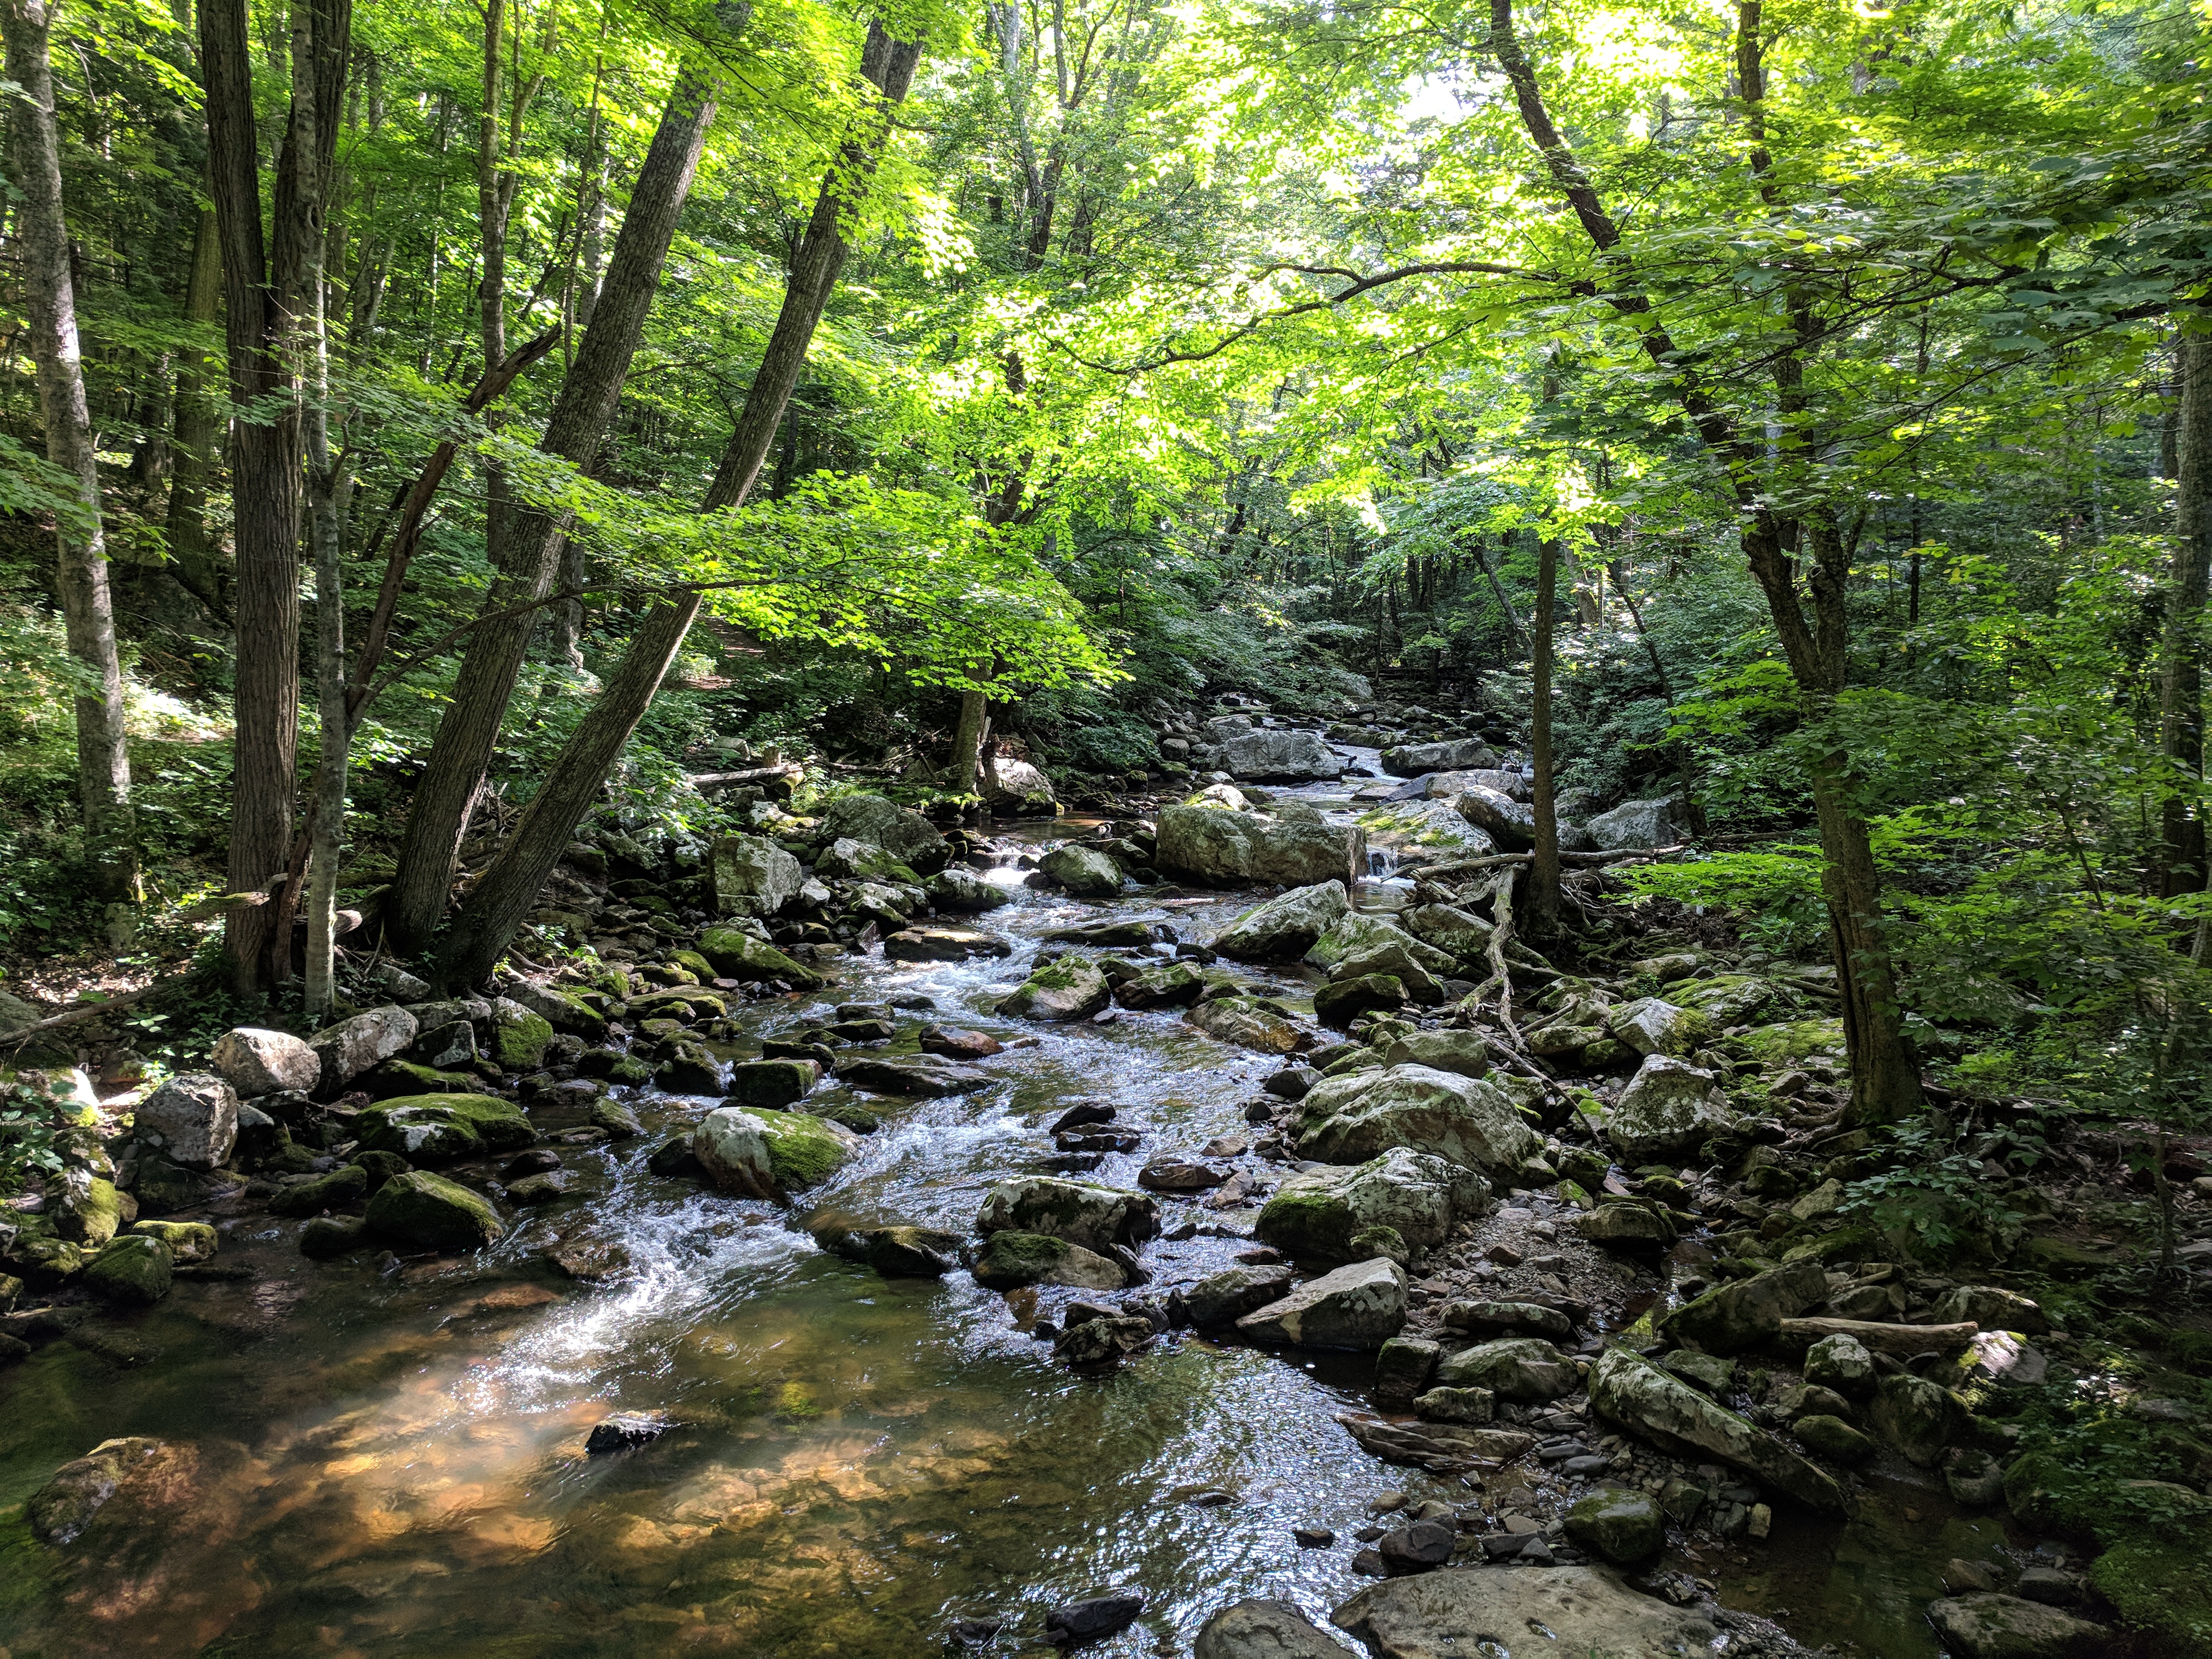 A creek flows over stones with green leafy trees on either side